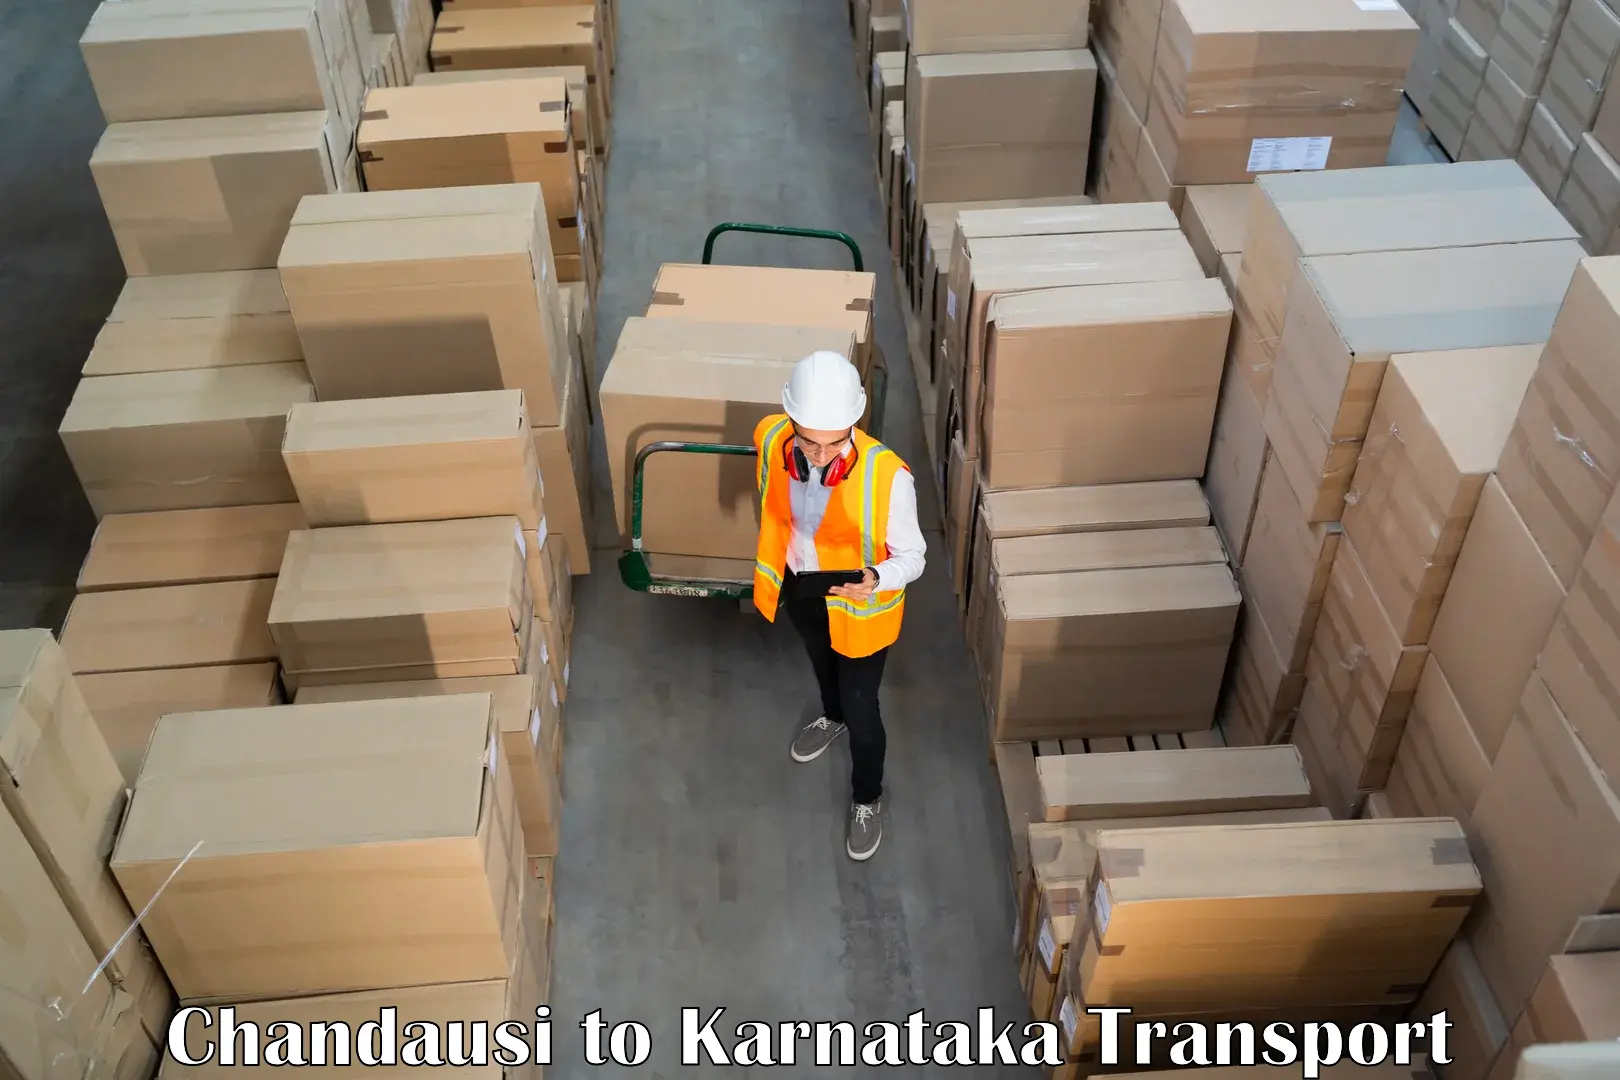 Goods delivery service Chandausi to Yelburga